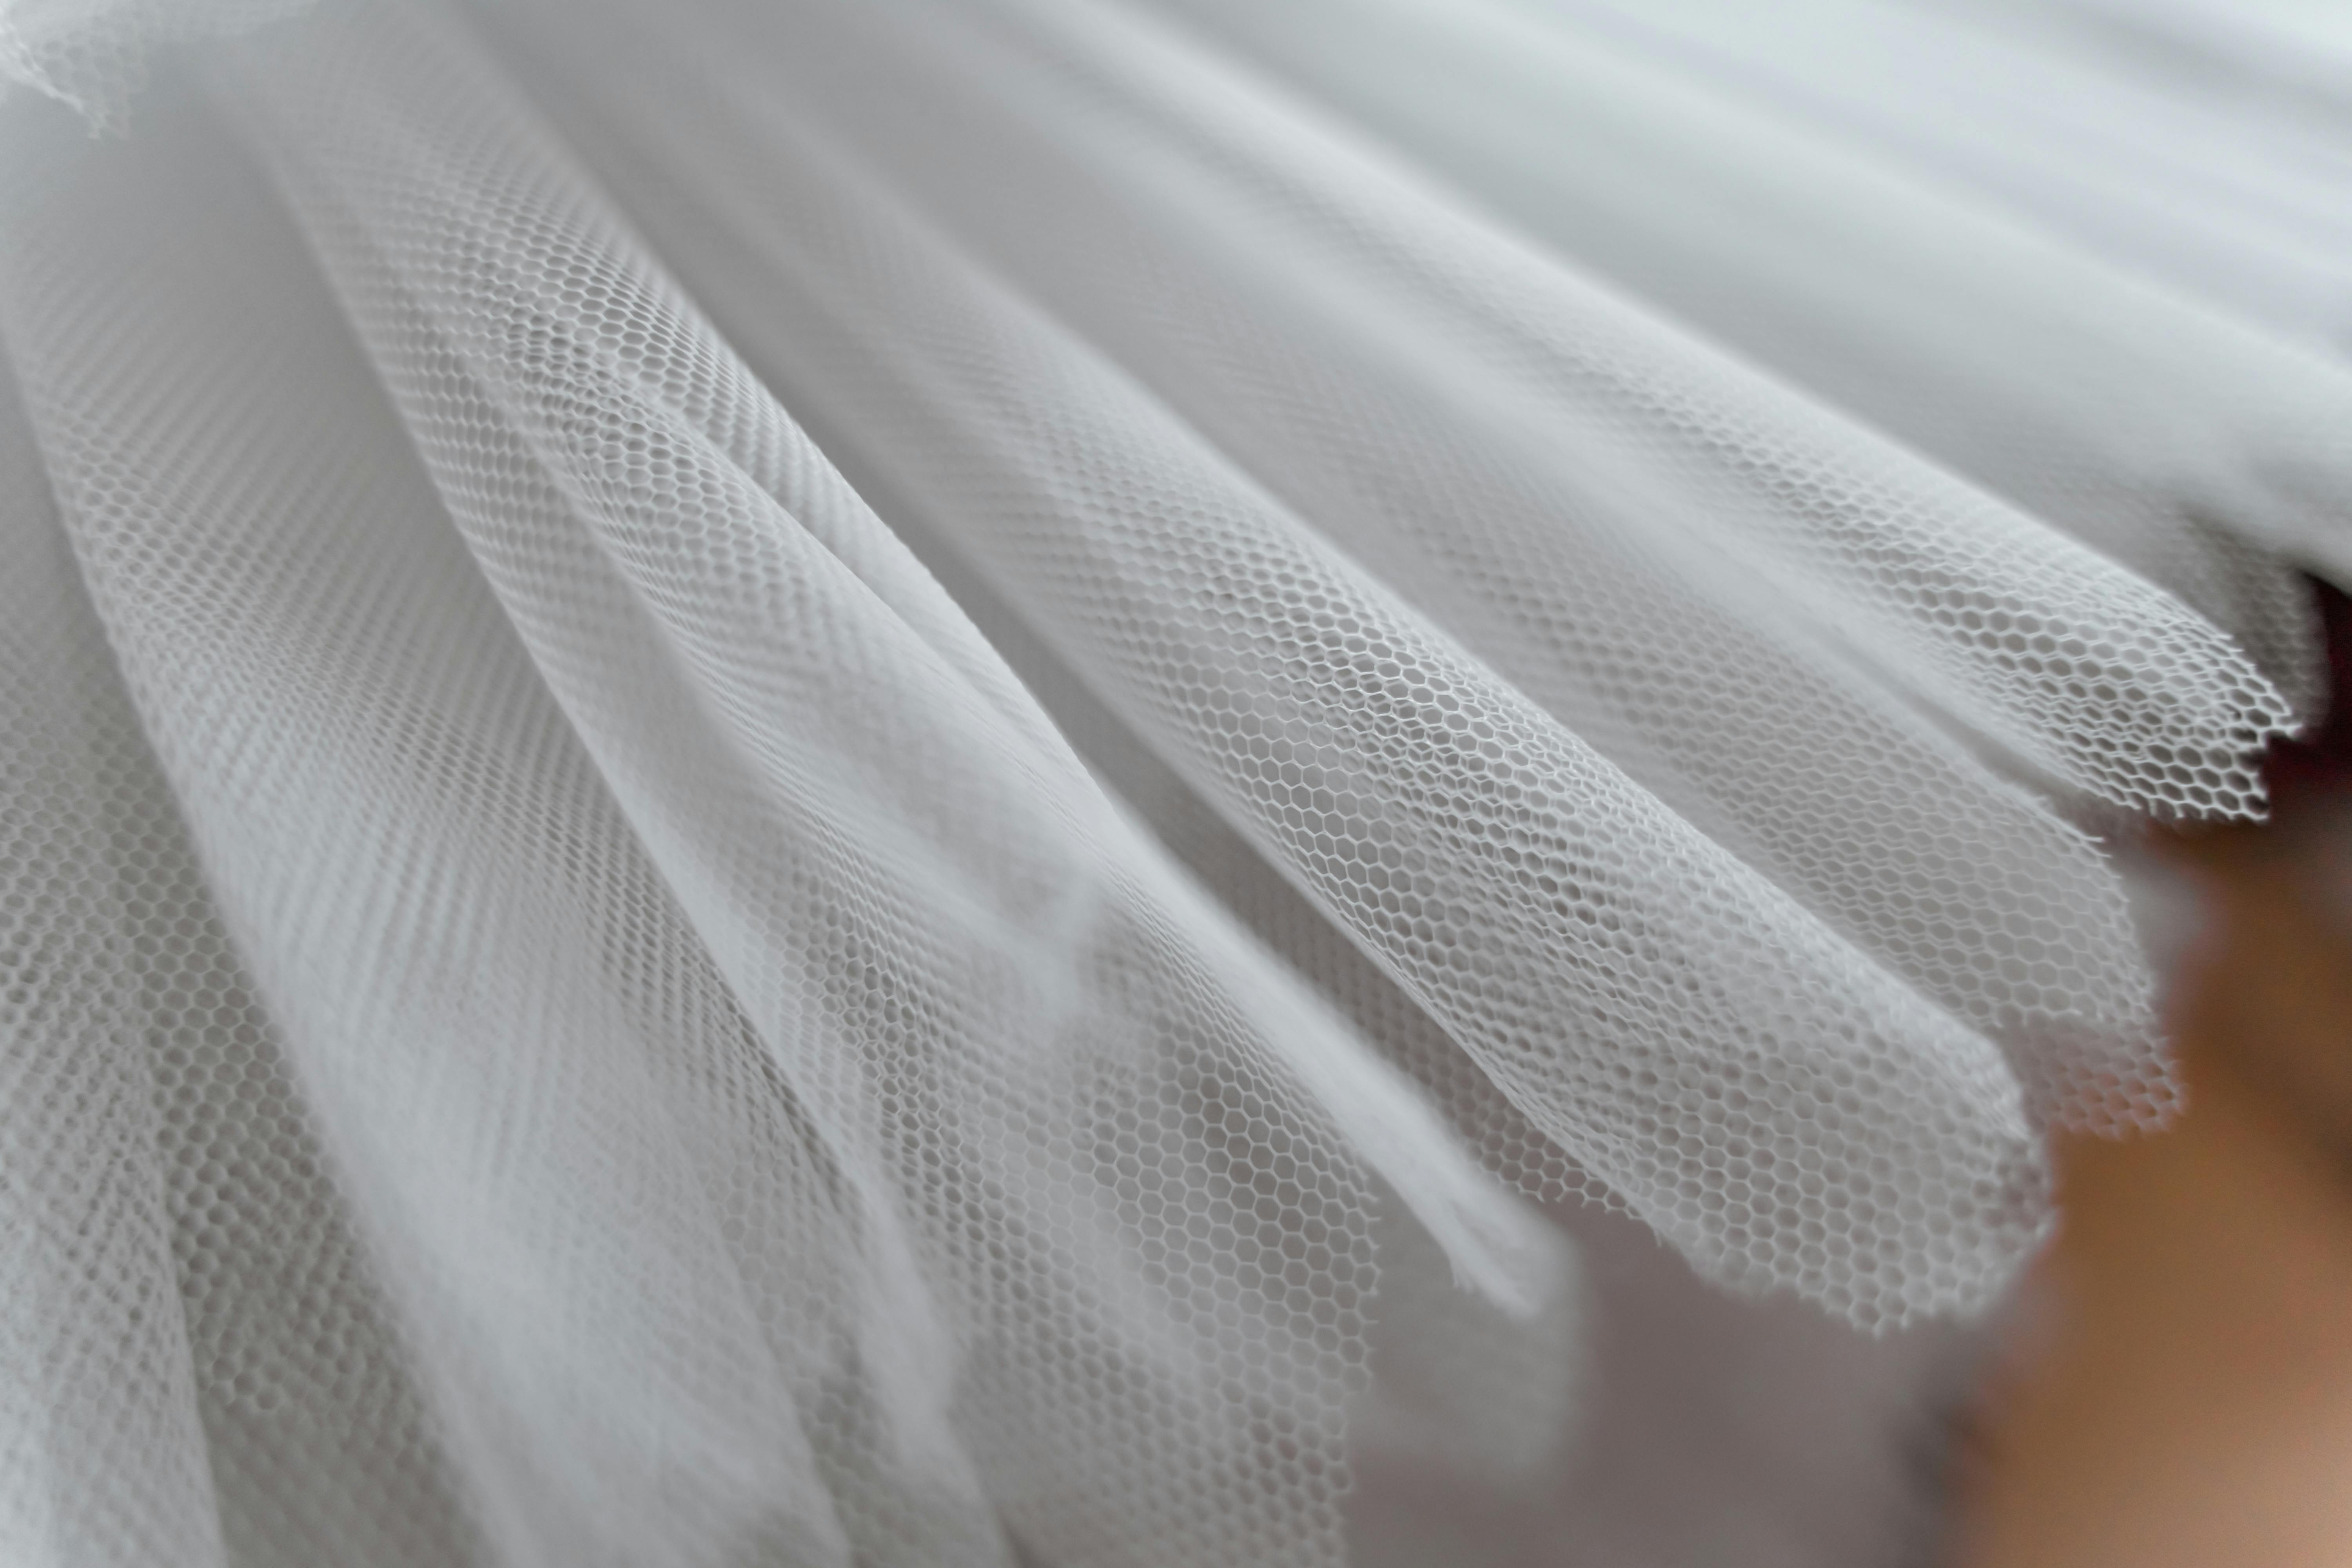 White Tulle Fabric in Close-up Photography · Free Stock Photo